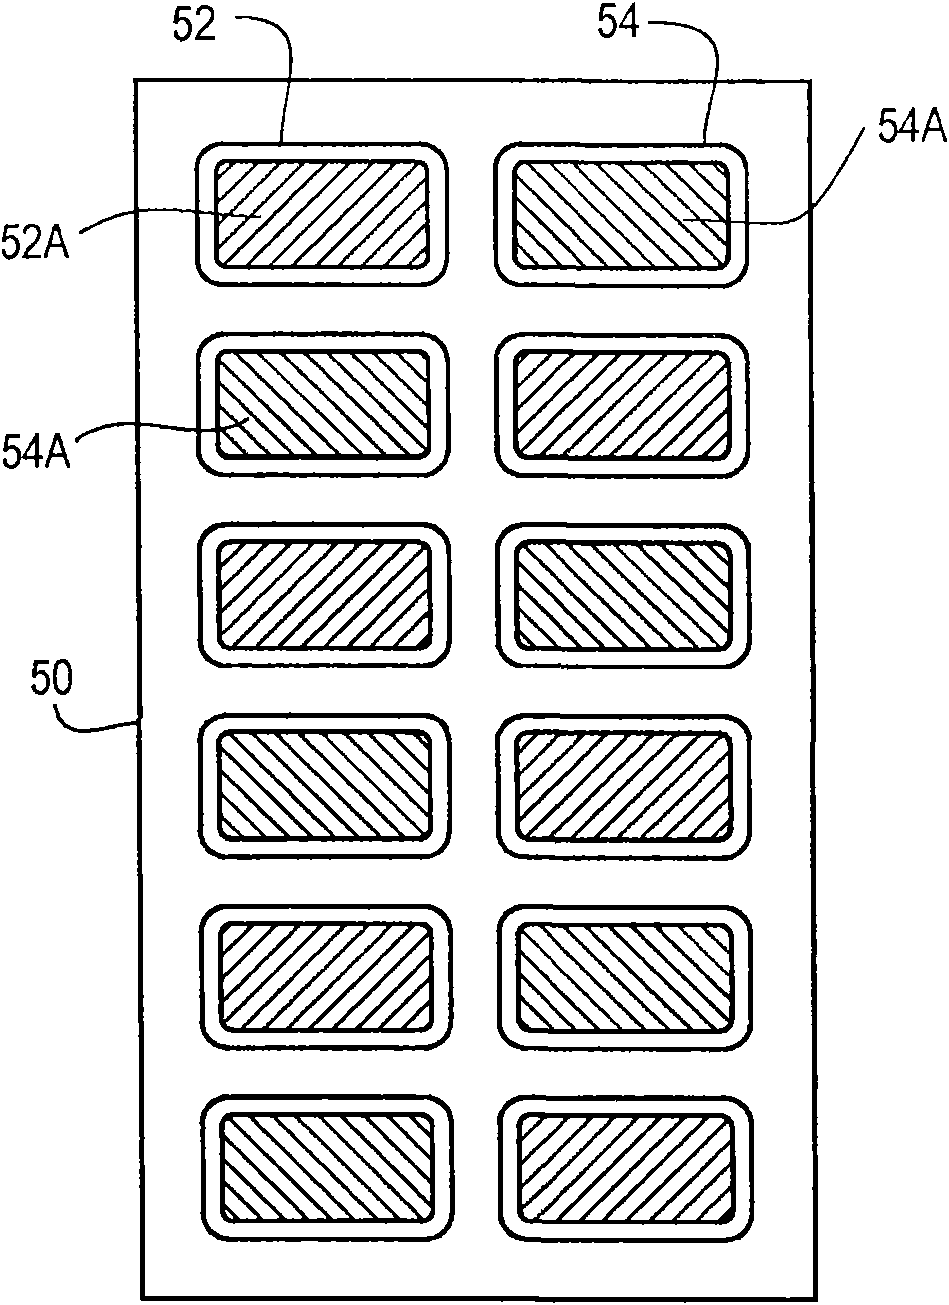 Non-contact printed comestible products and apparatus and method for producing same